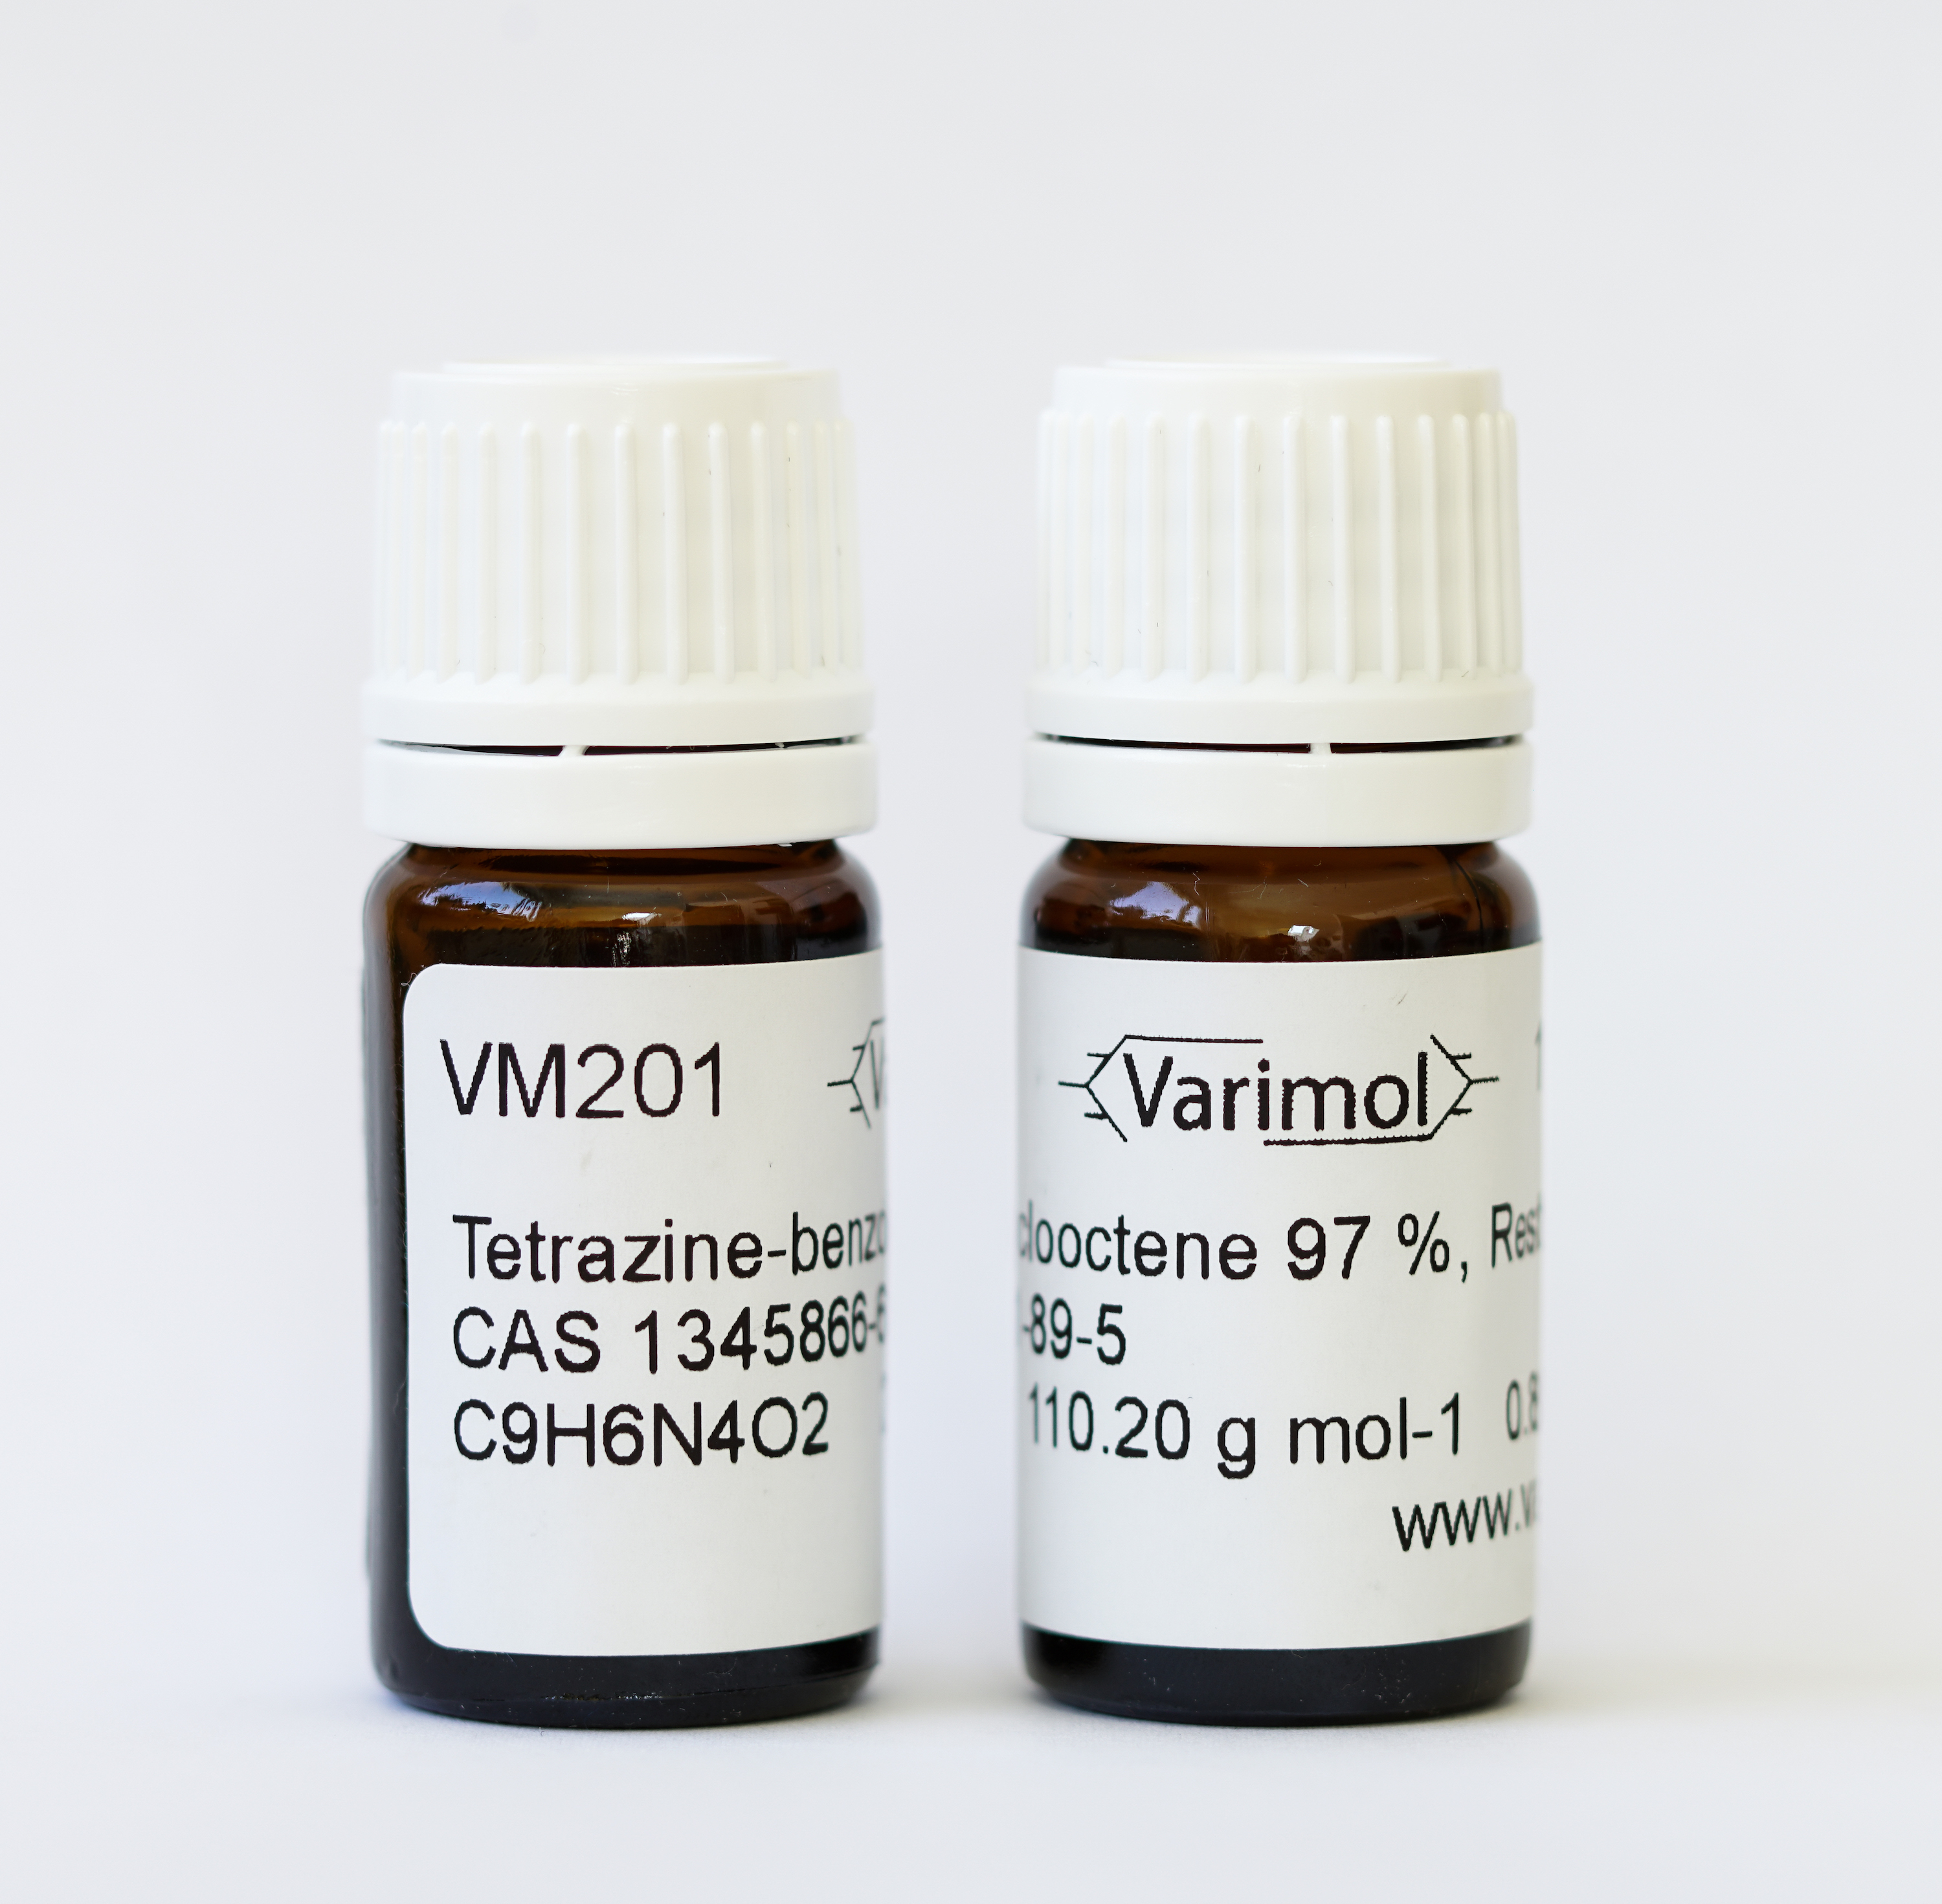 The photo shows two small brown vials that contain all the necessary reagents for use by Varimol customers